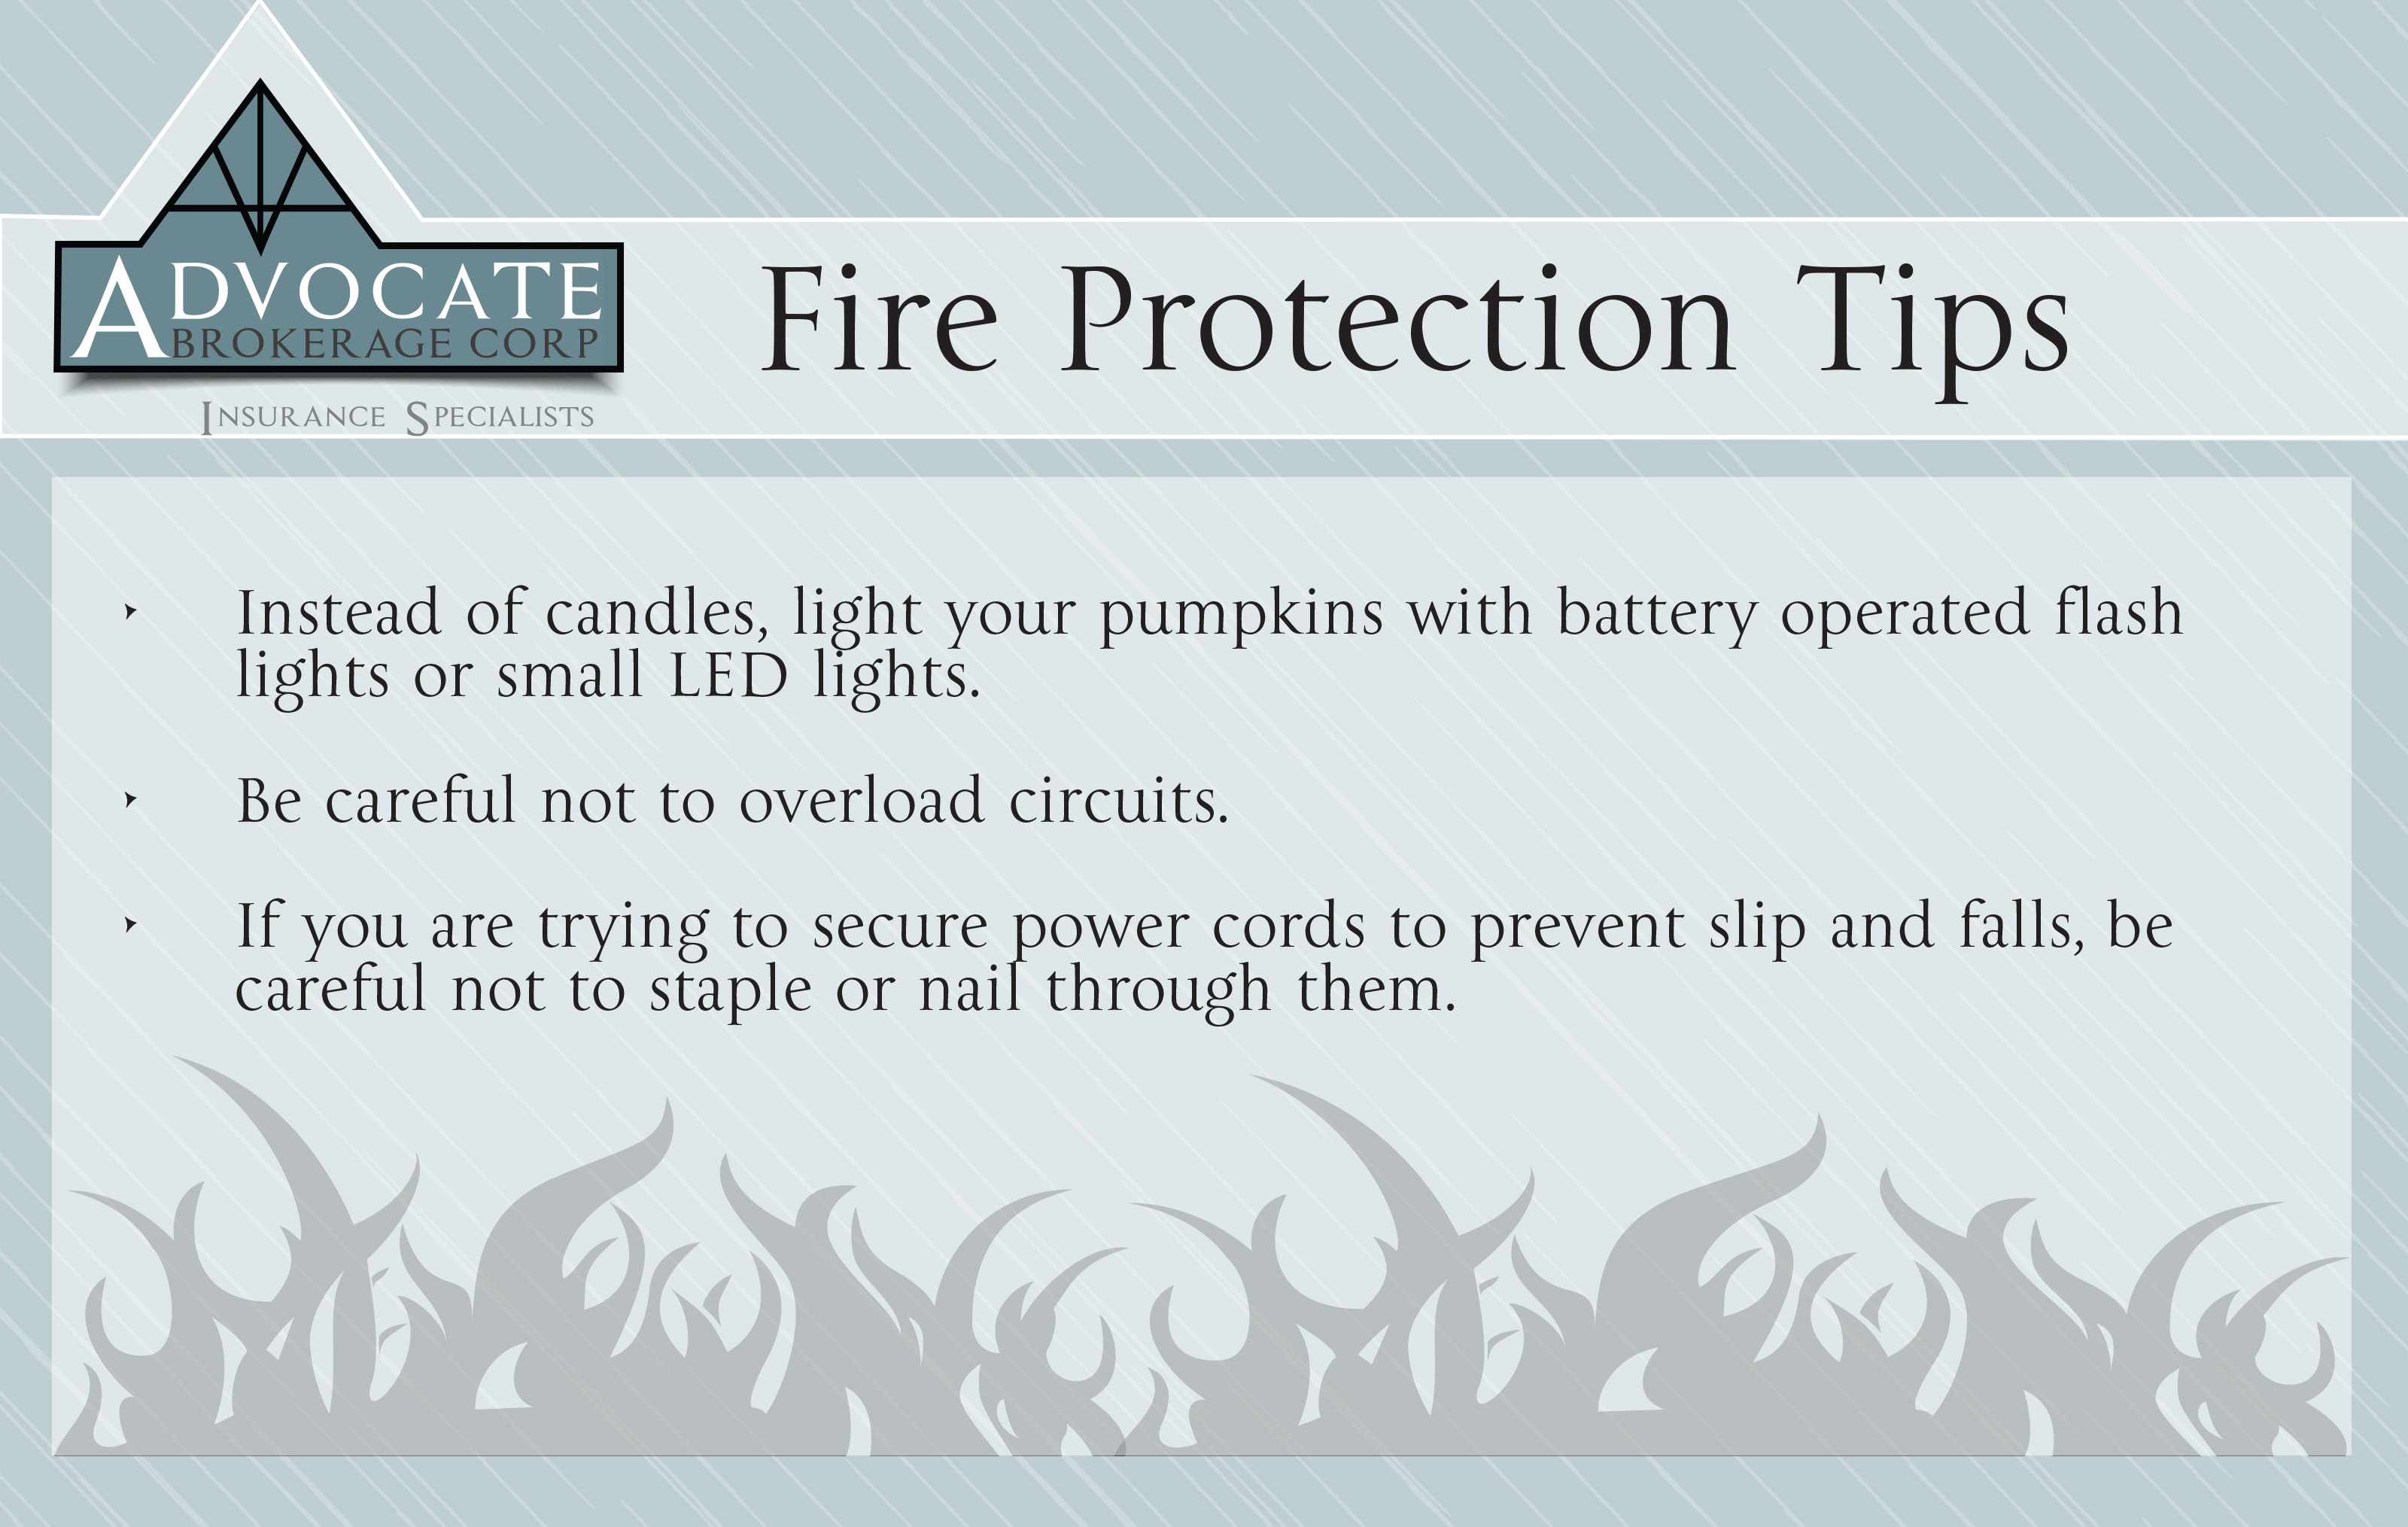 FireProtectionTips